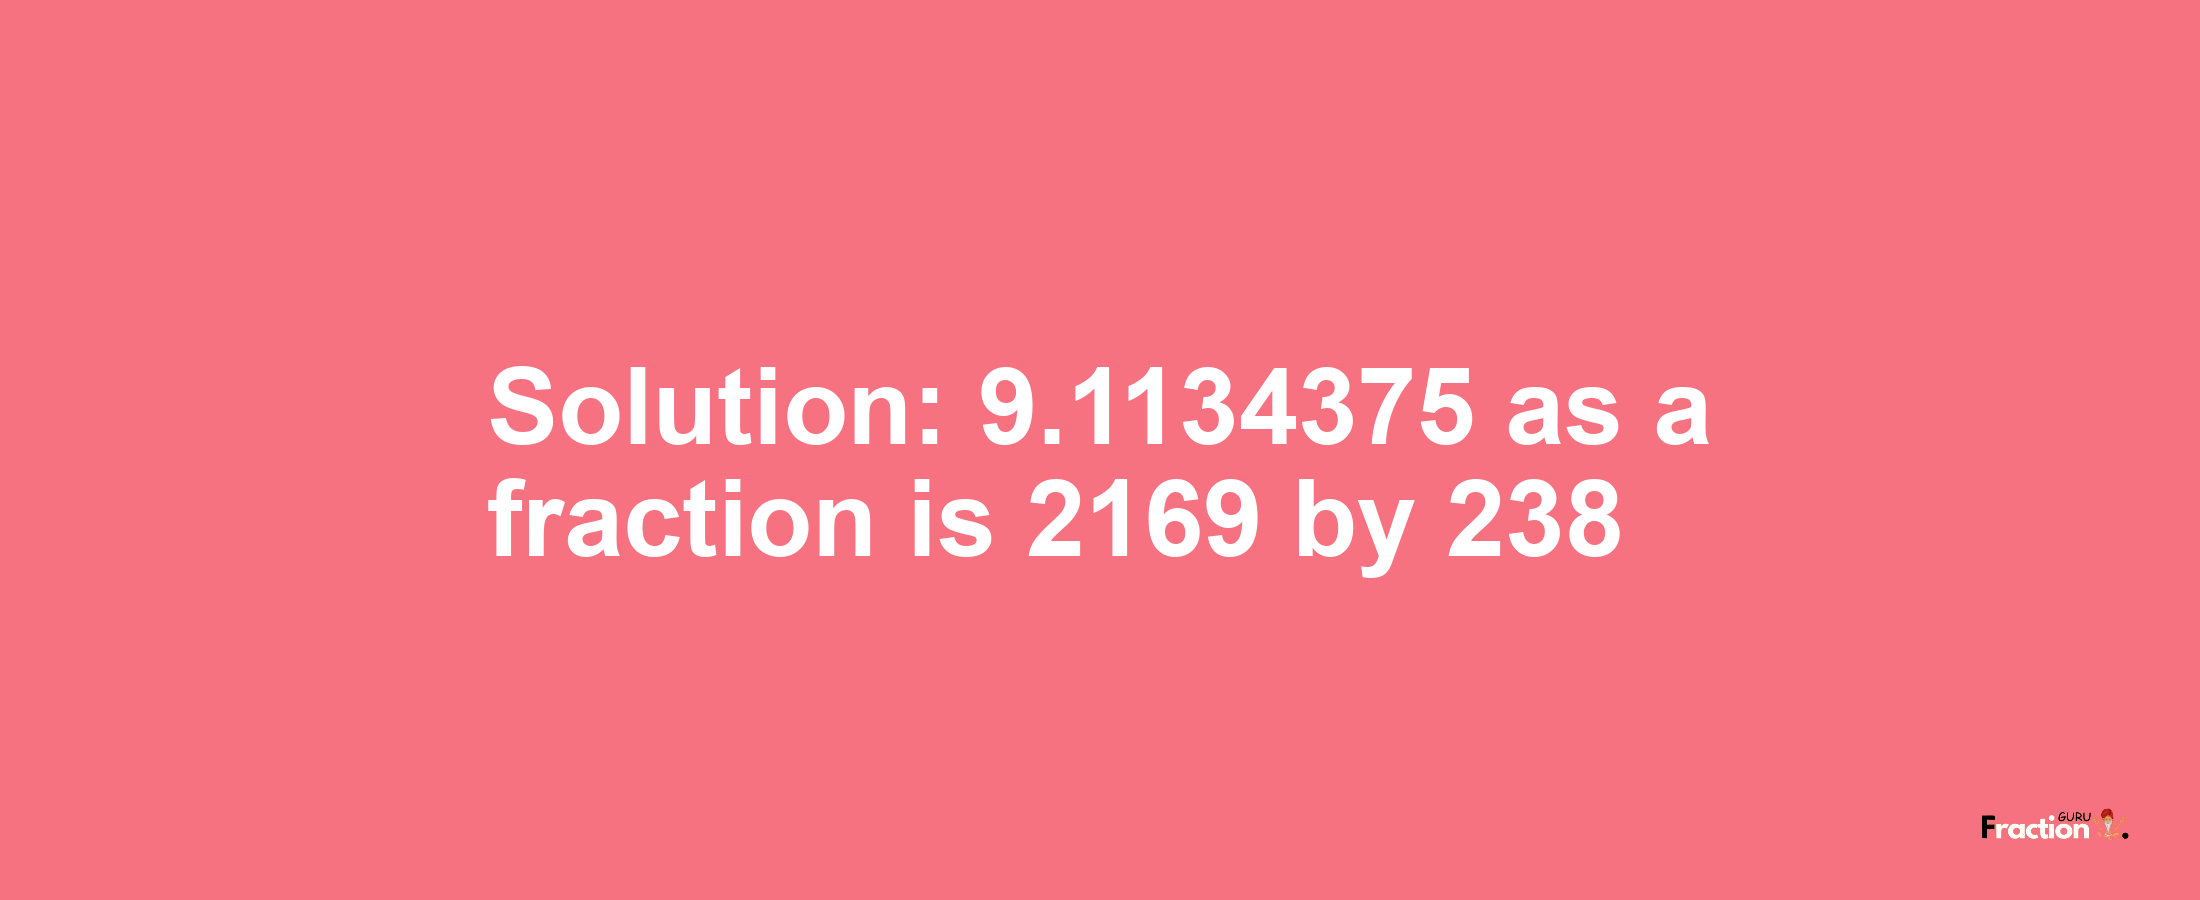 Solution:9.1134375 as a fraction is 2169/238